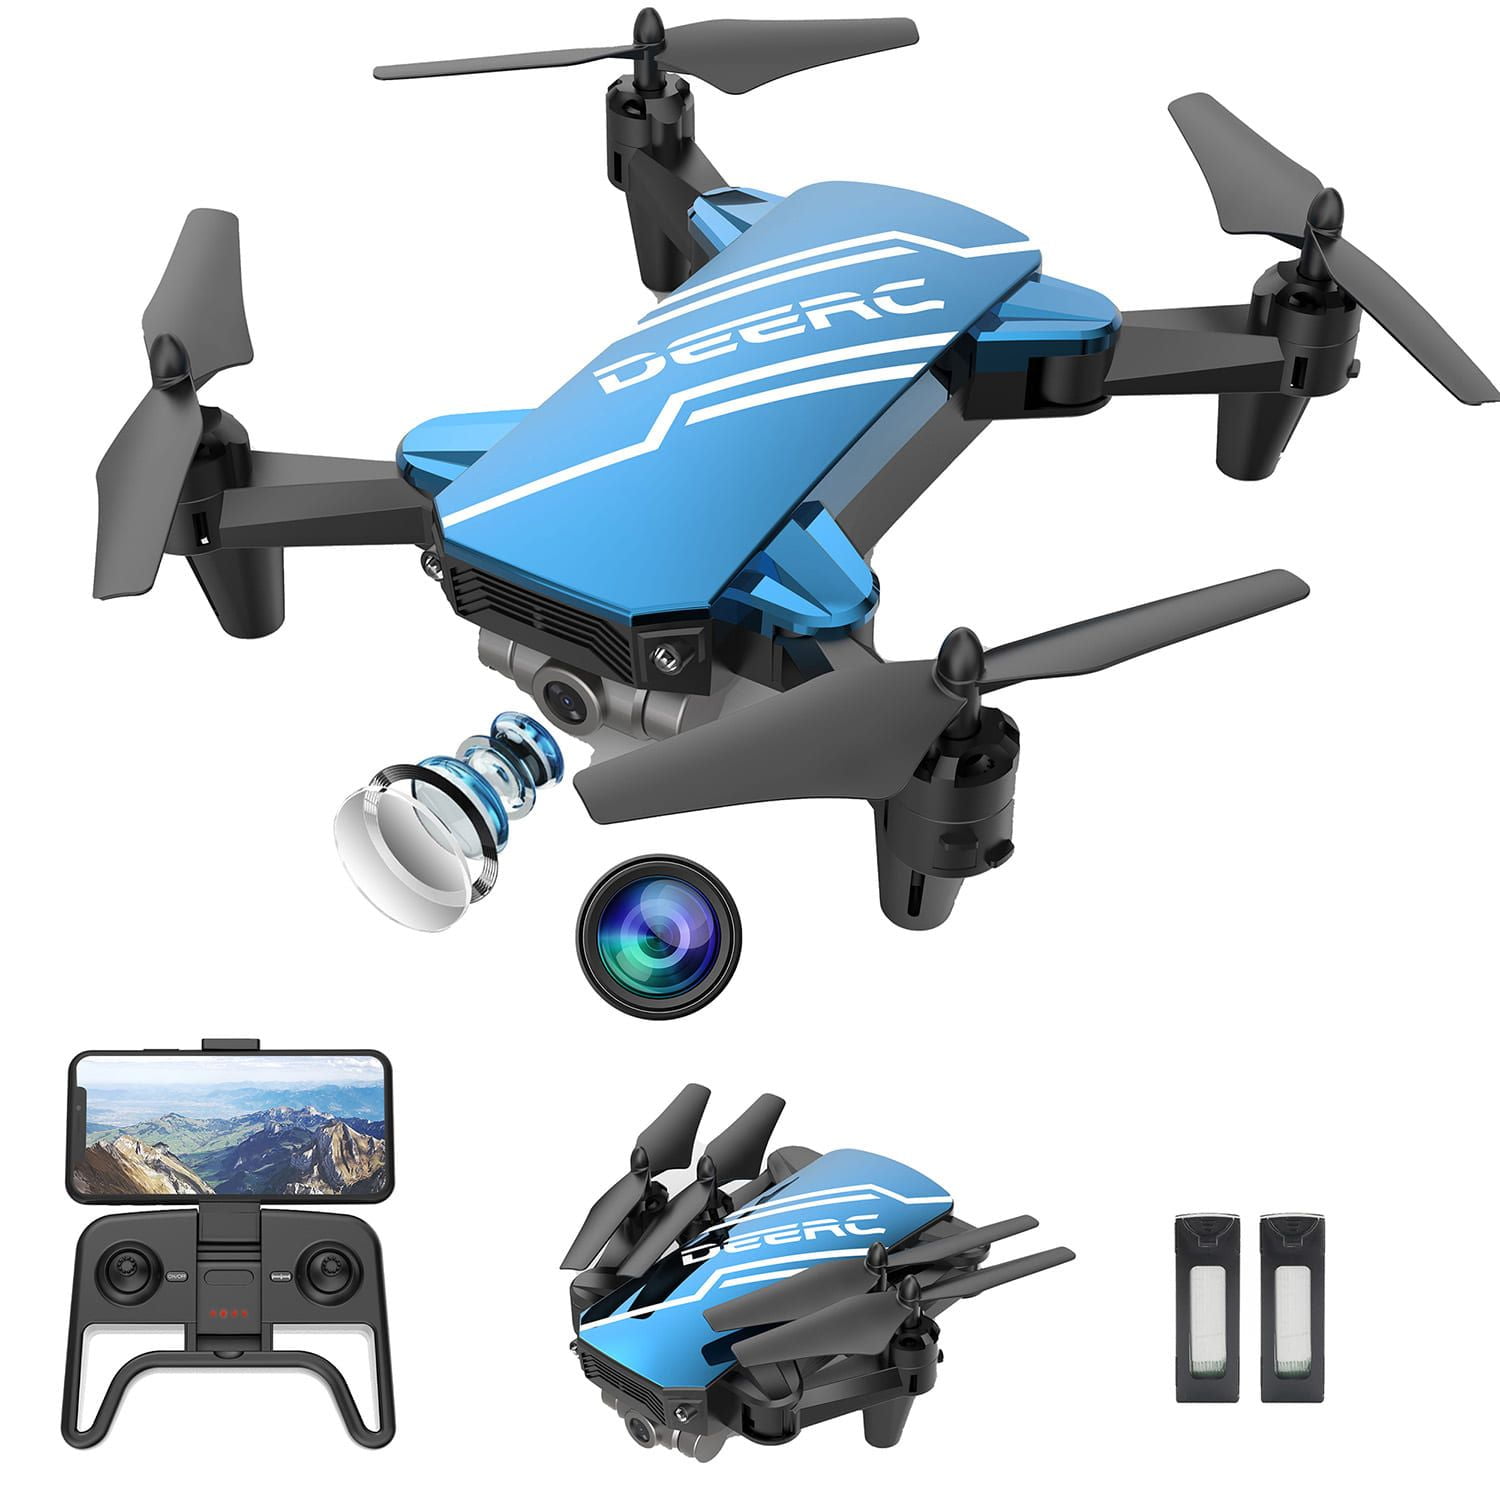 DEERC D20 Mini Drone for Kids with FPV Camera Remote Control Toys Gifts for  Boys Girls with Voice Control Gestures Selfie Altitude Hold Gravity Control  Batteries Gifts